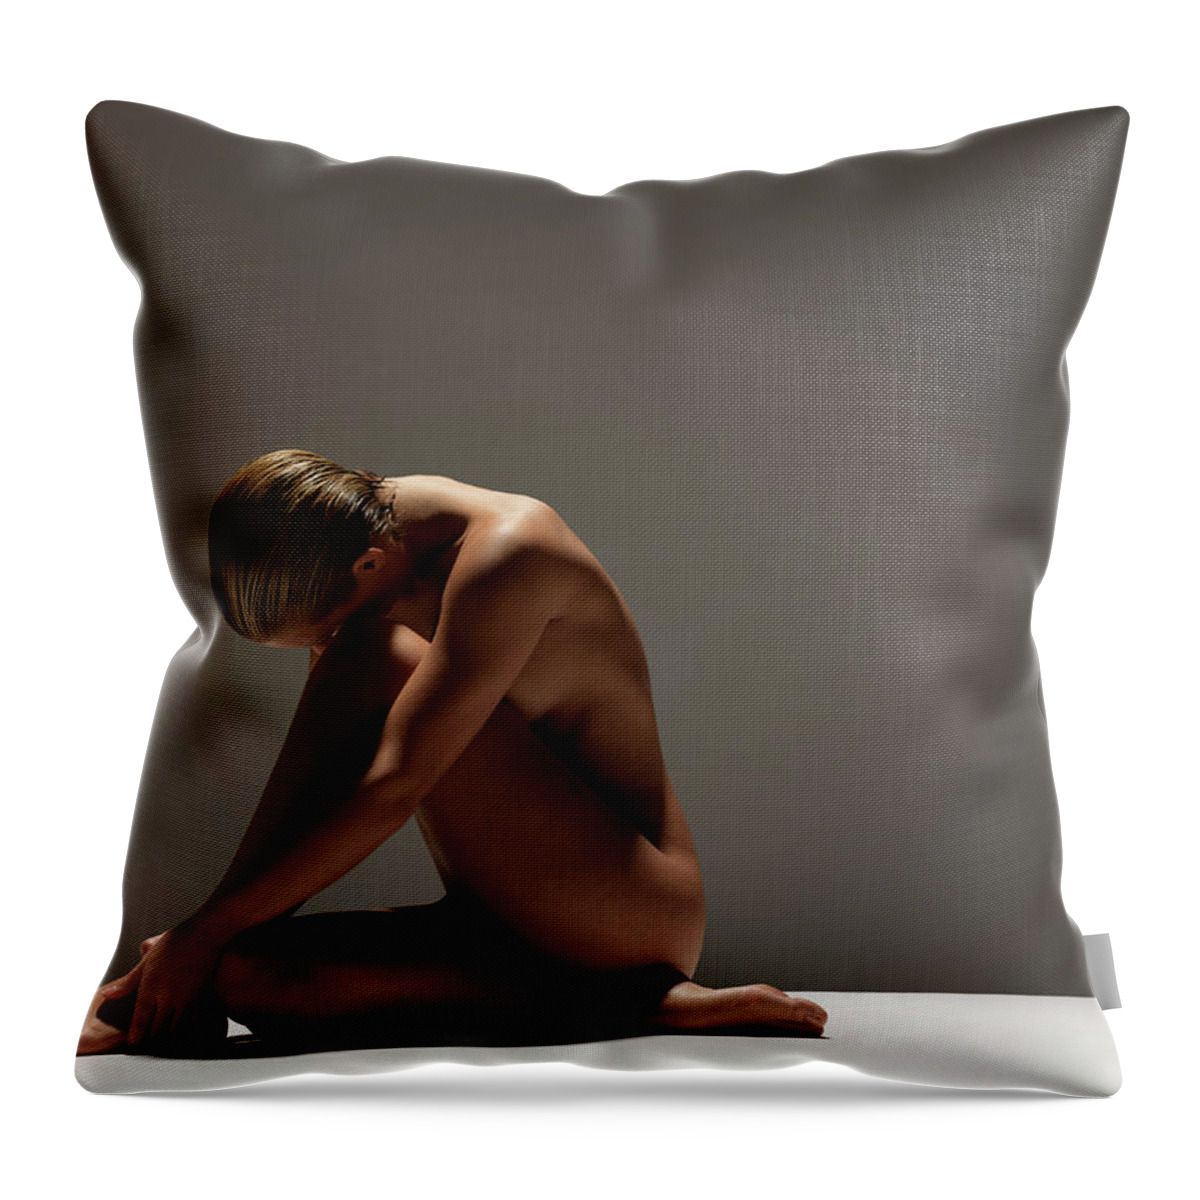 Leaning Throw Pillow featuring the photograph Naked Woman Sitting by John Lamb